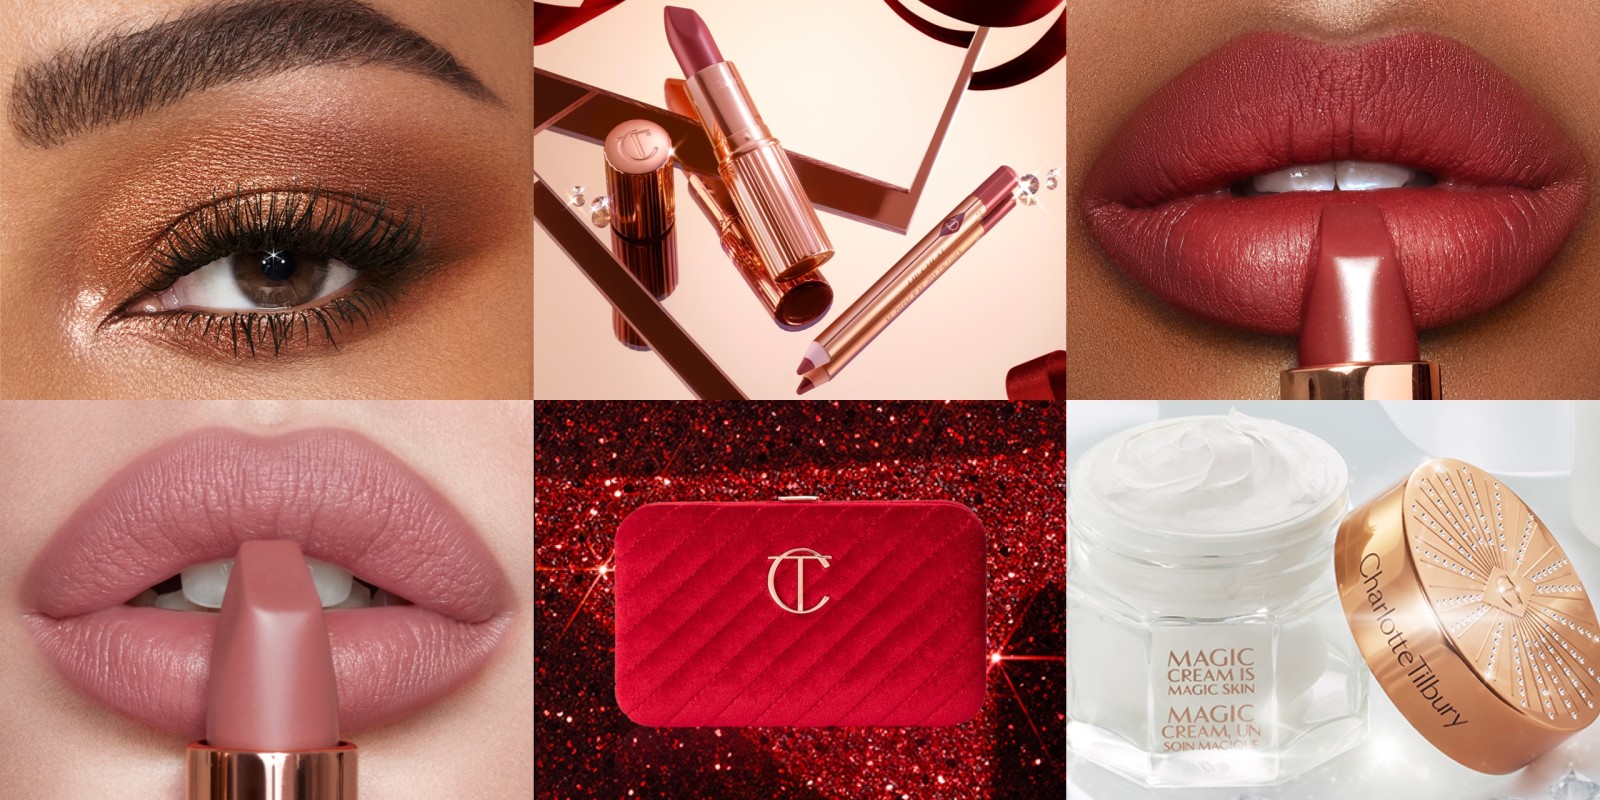 Banner with a picture collage of lips close-up of models applying matte lipsticks, an eye close-up of a model wearing berry rose eyeliner, lipstick and lip liner placed on a table, a makeup pouch with face and eye brushes, and an open glass jar with pearly-white face cream.